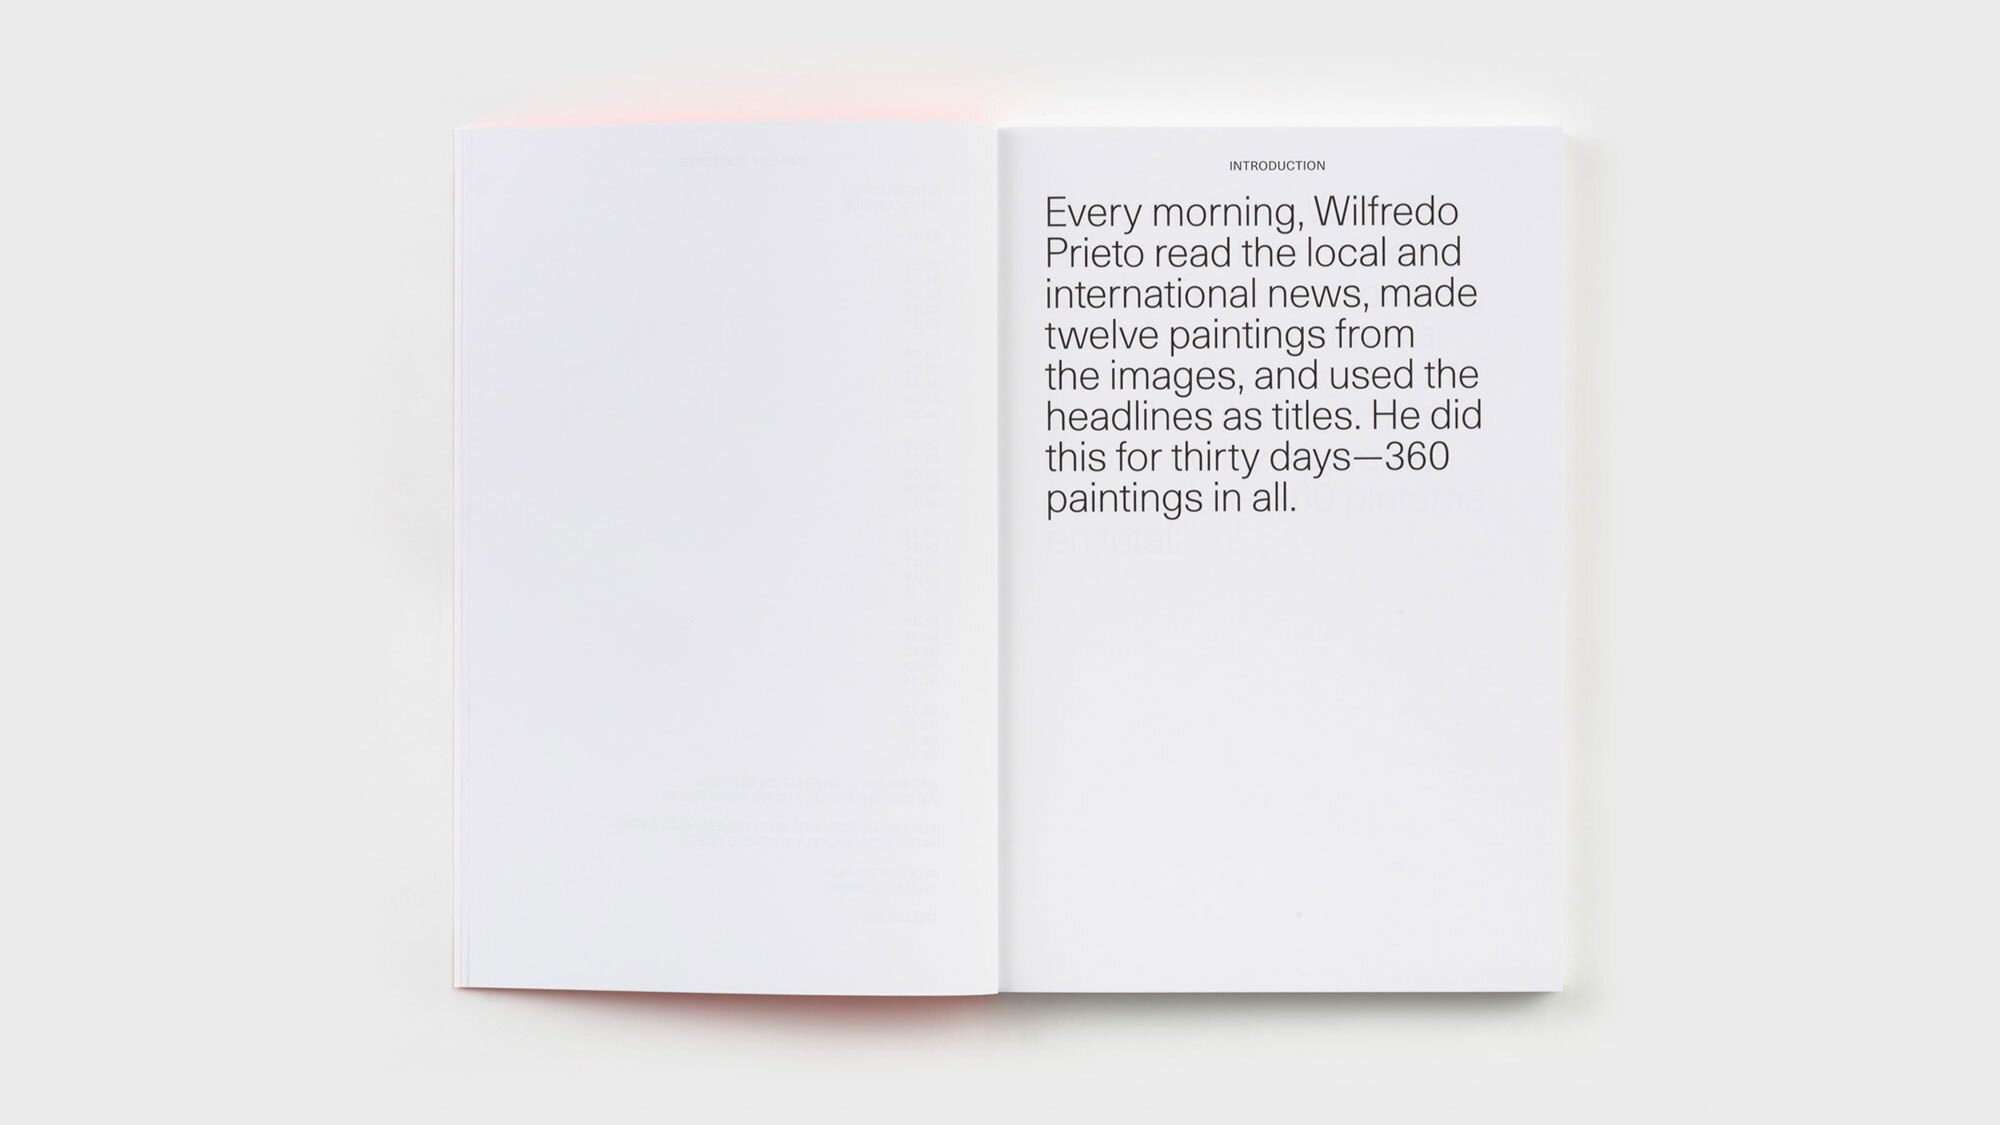 An introduction to the book, in sans-serif large text on bright white paper. It says: 'Every morning, Wilfredo Prieto read the local and international news, made twelve paintings from the images, and use the headlines as titles. He did this for thirty days—360 paintings in all.'